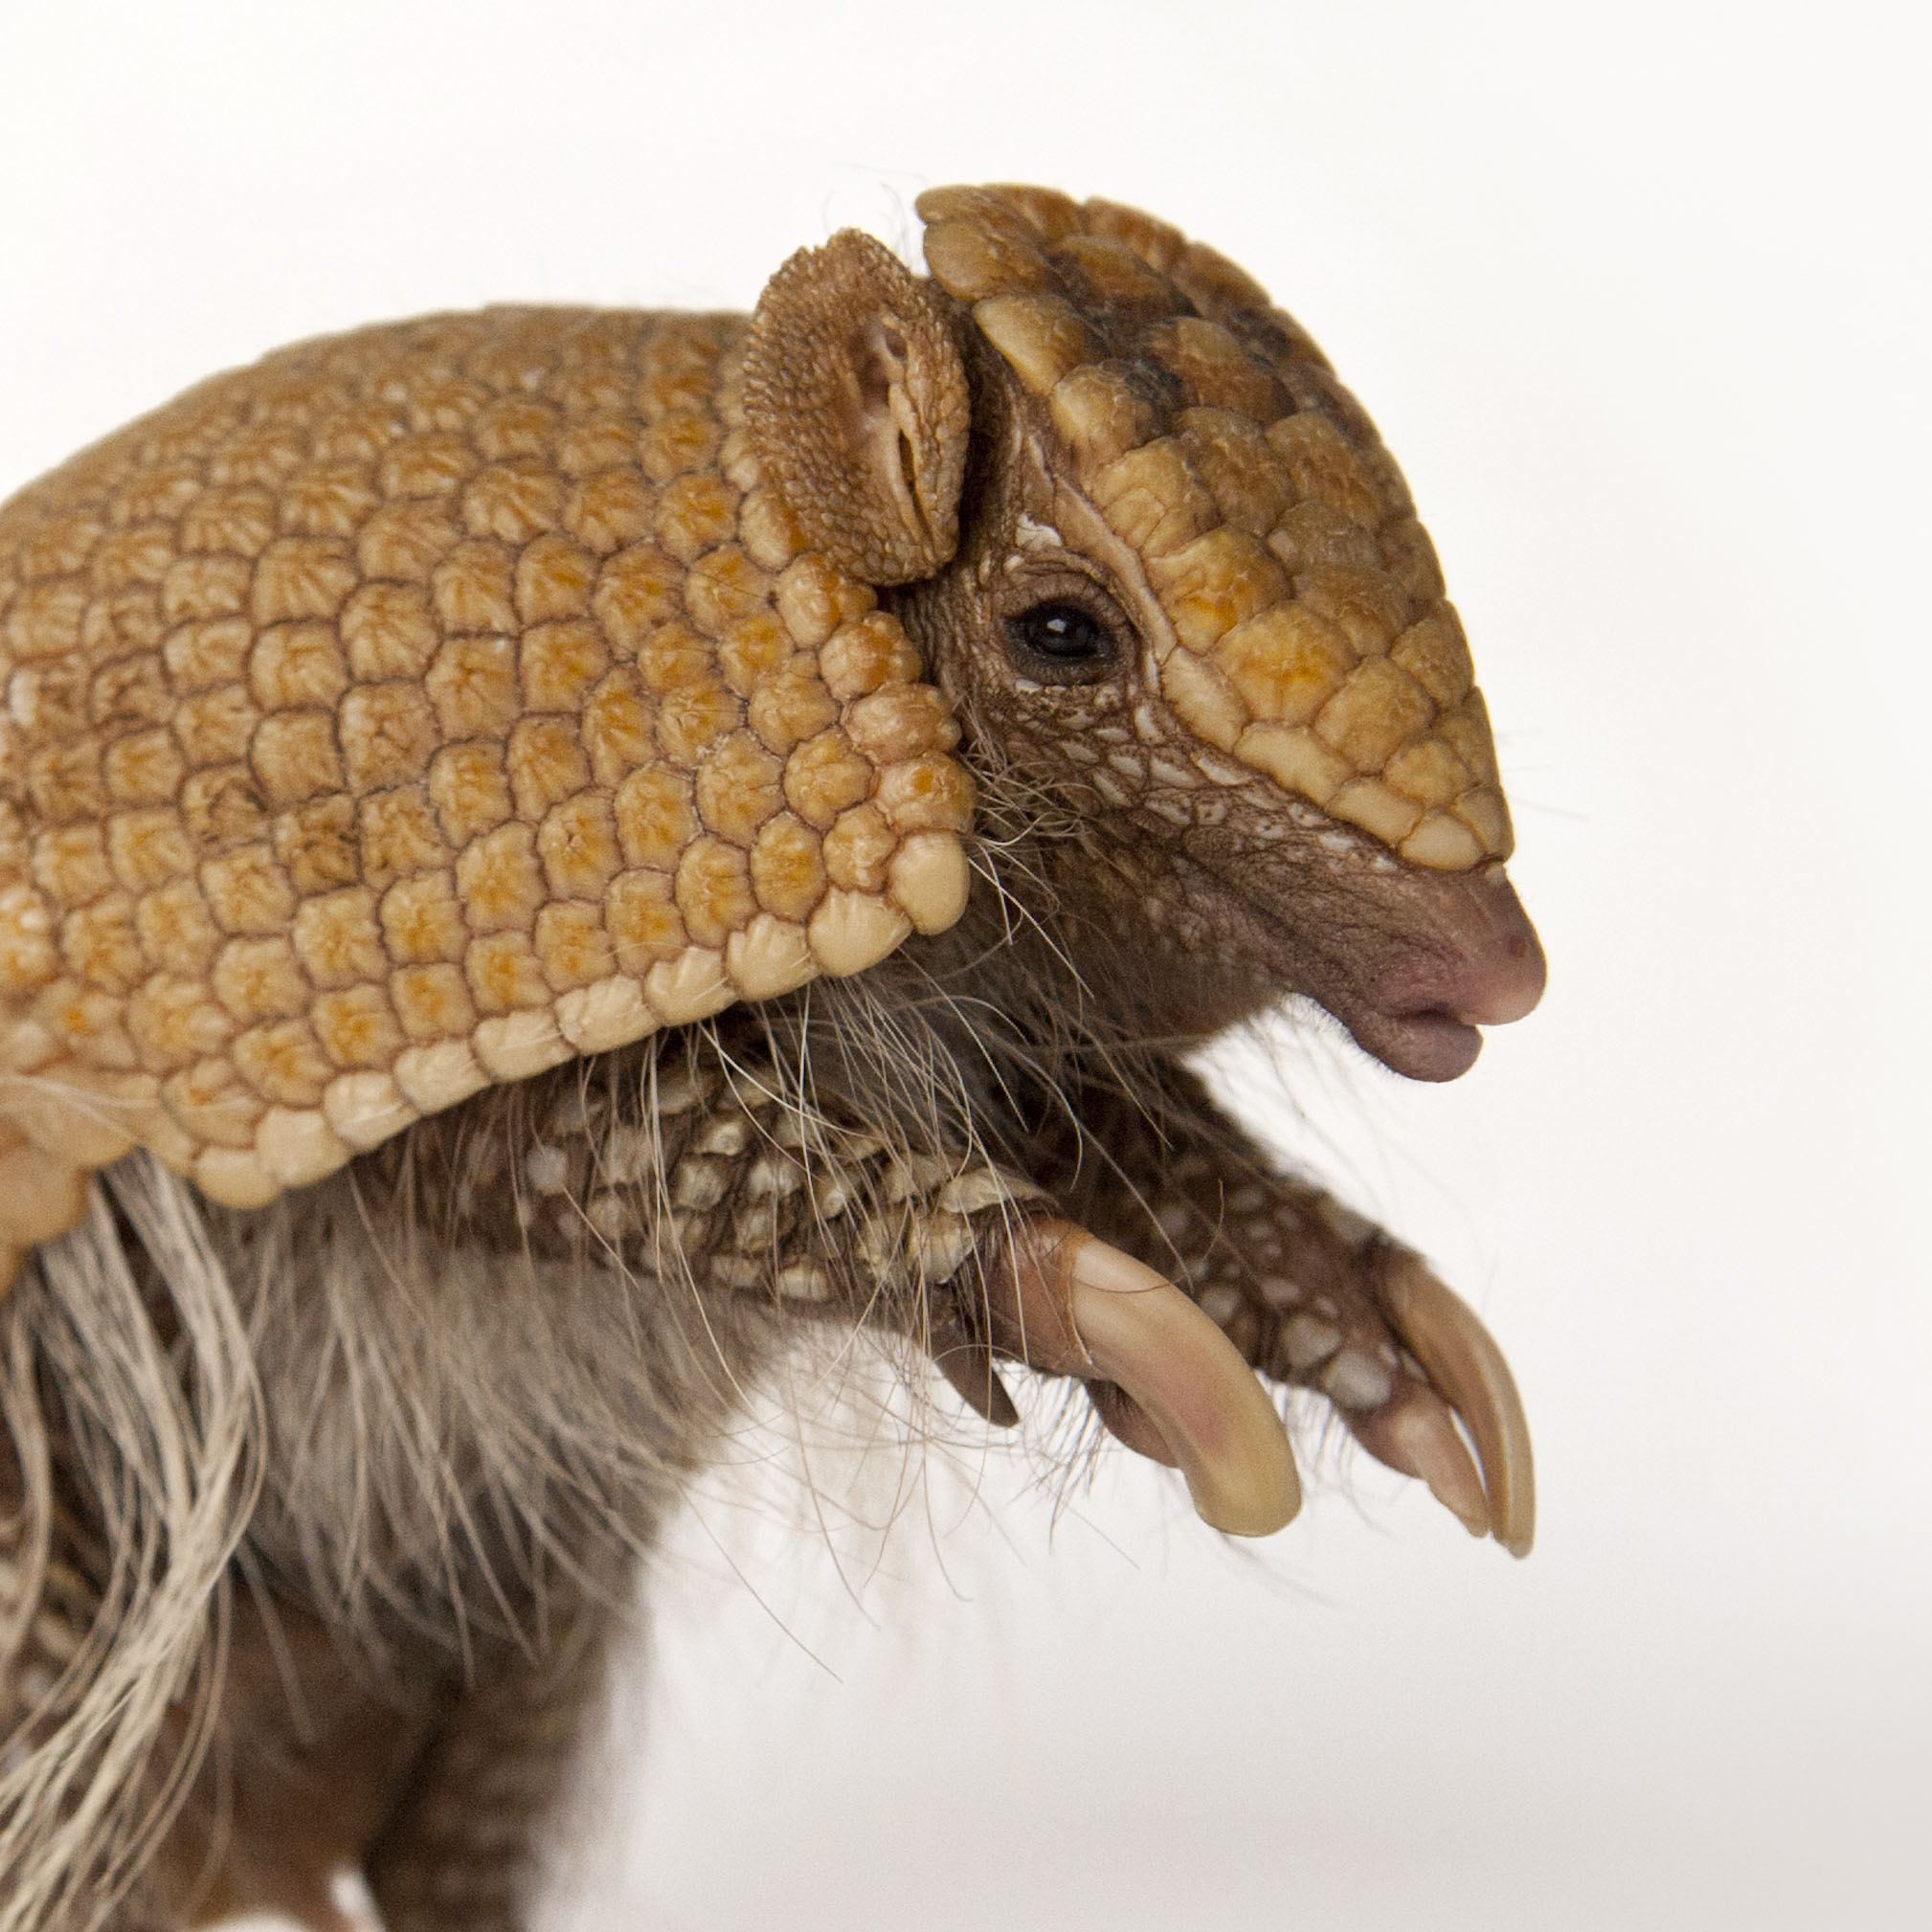 HQ Armadillo Wallpapers | File 418.85Kb